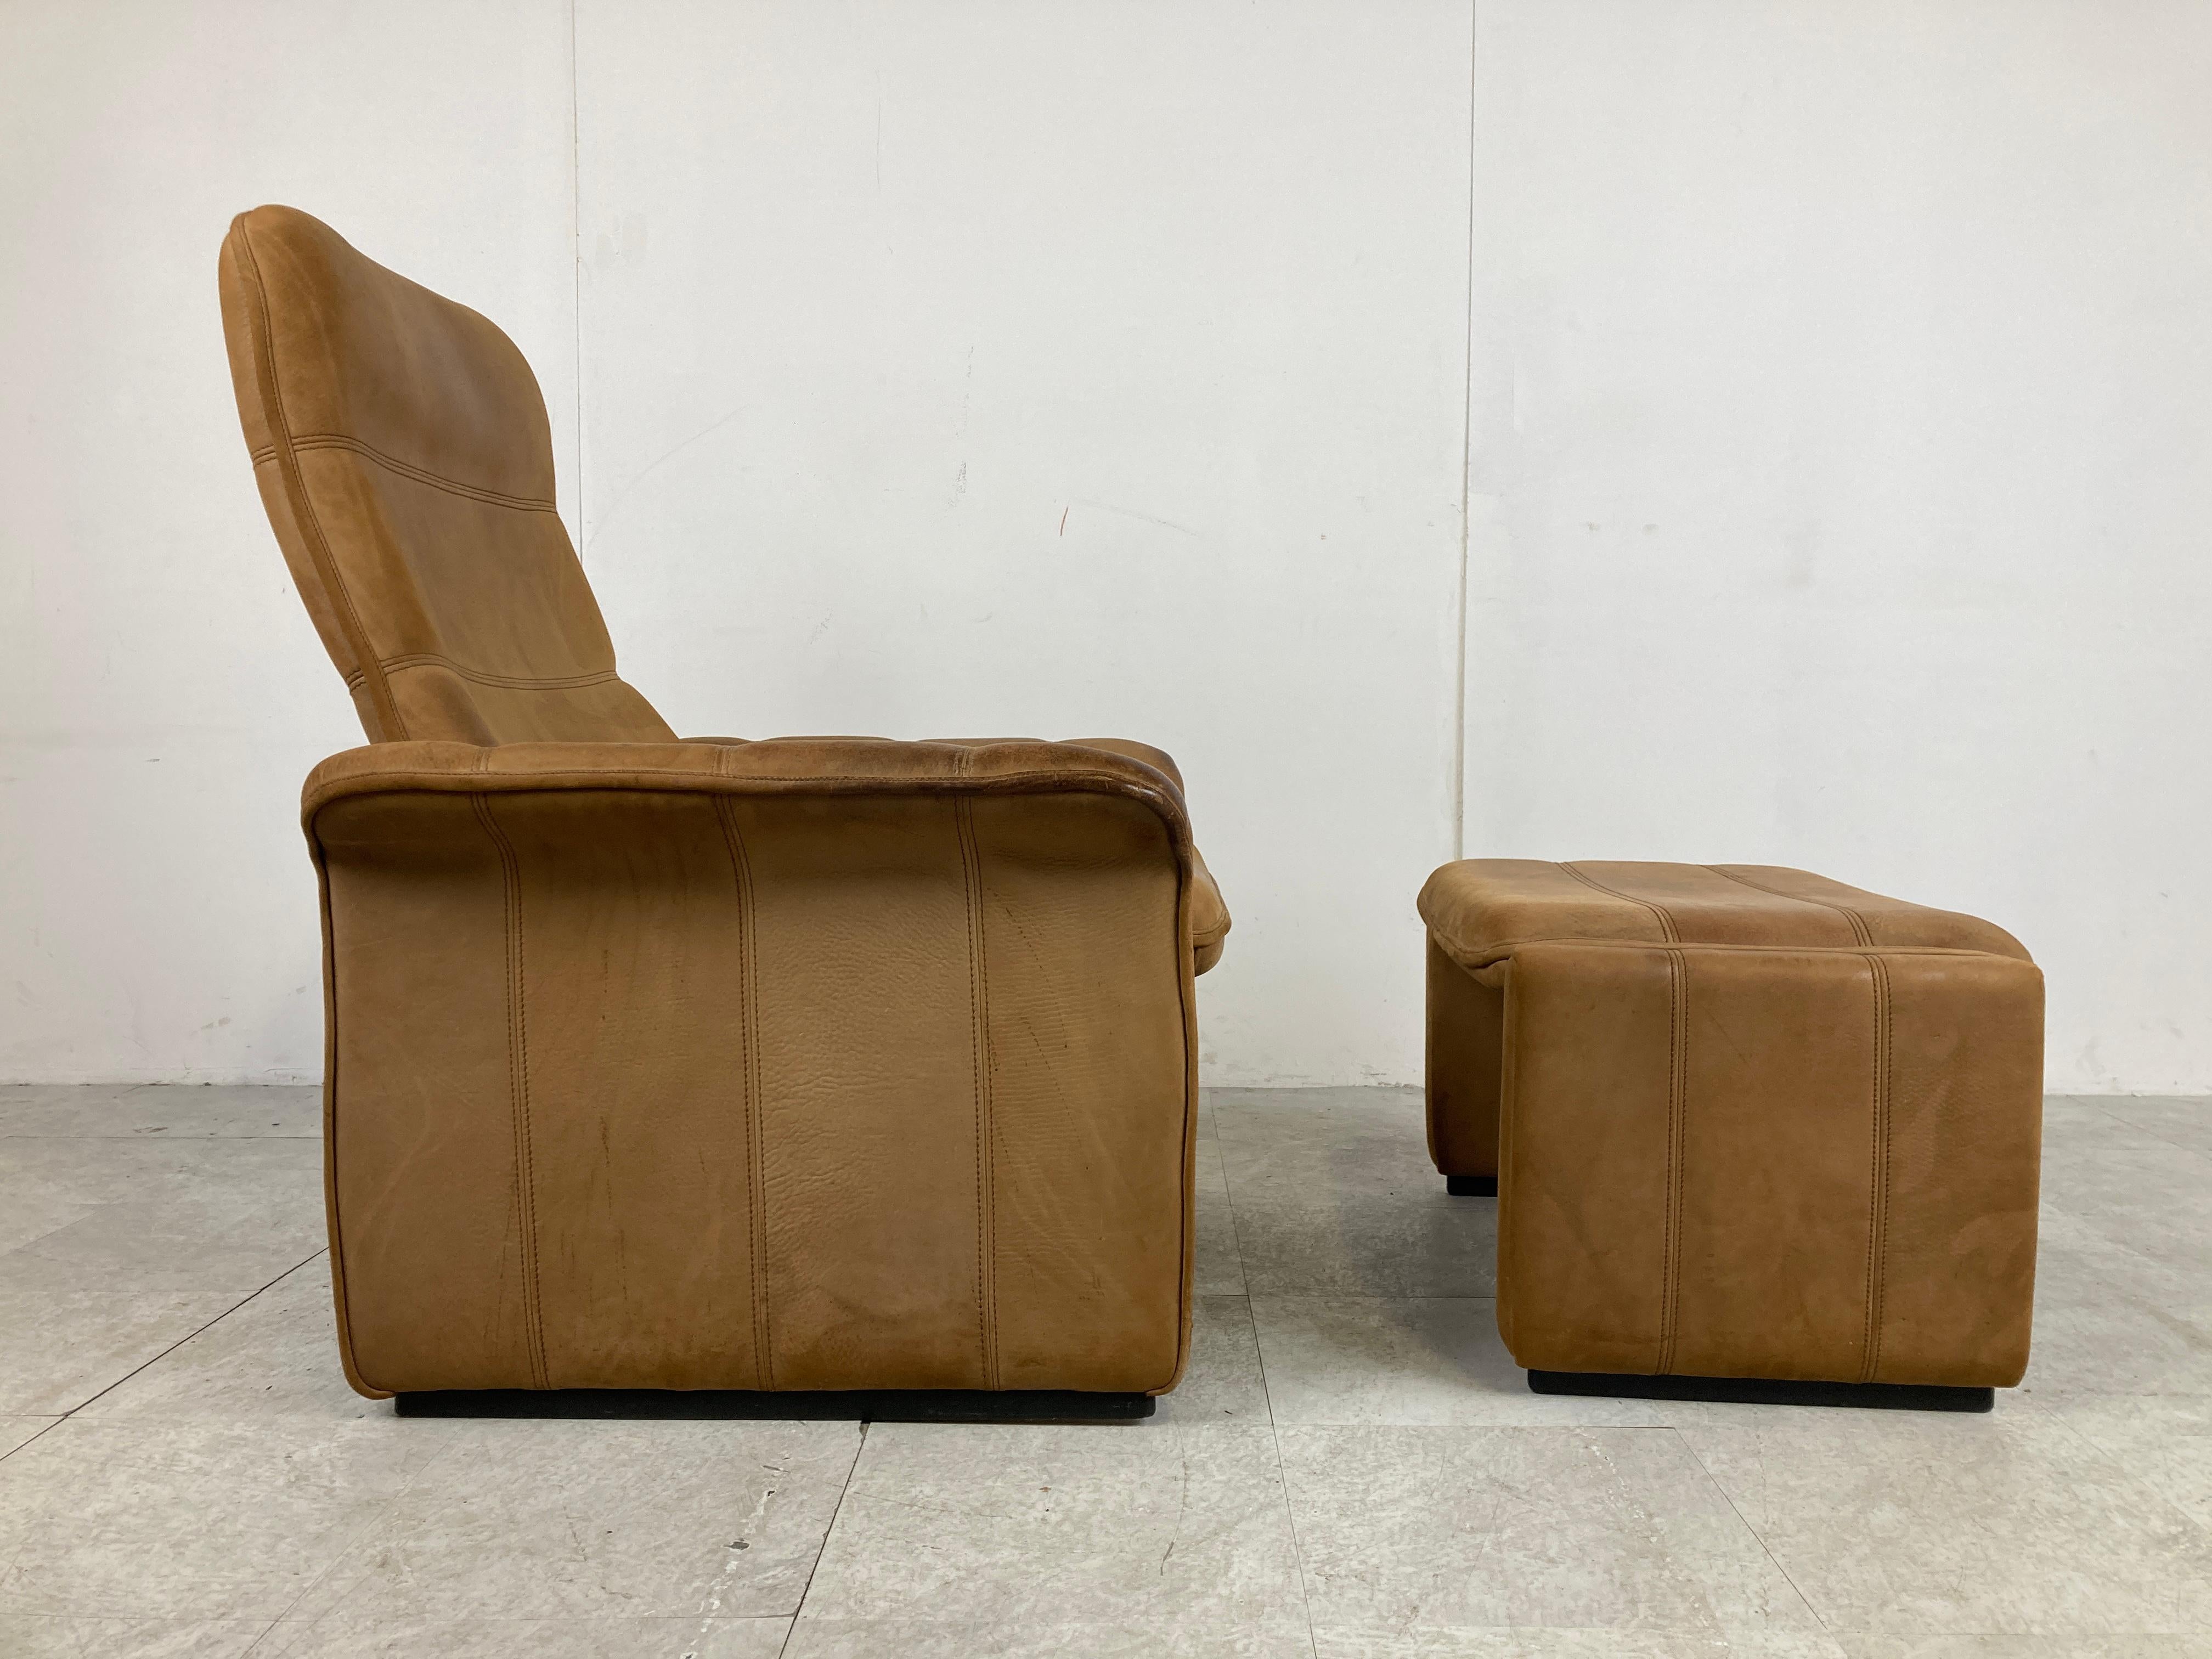 Vintage Ds 50 Leather Lounge Chair and Ottoman by De Sede, 1970s For Sale 3